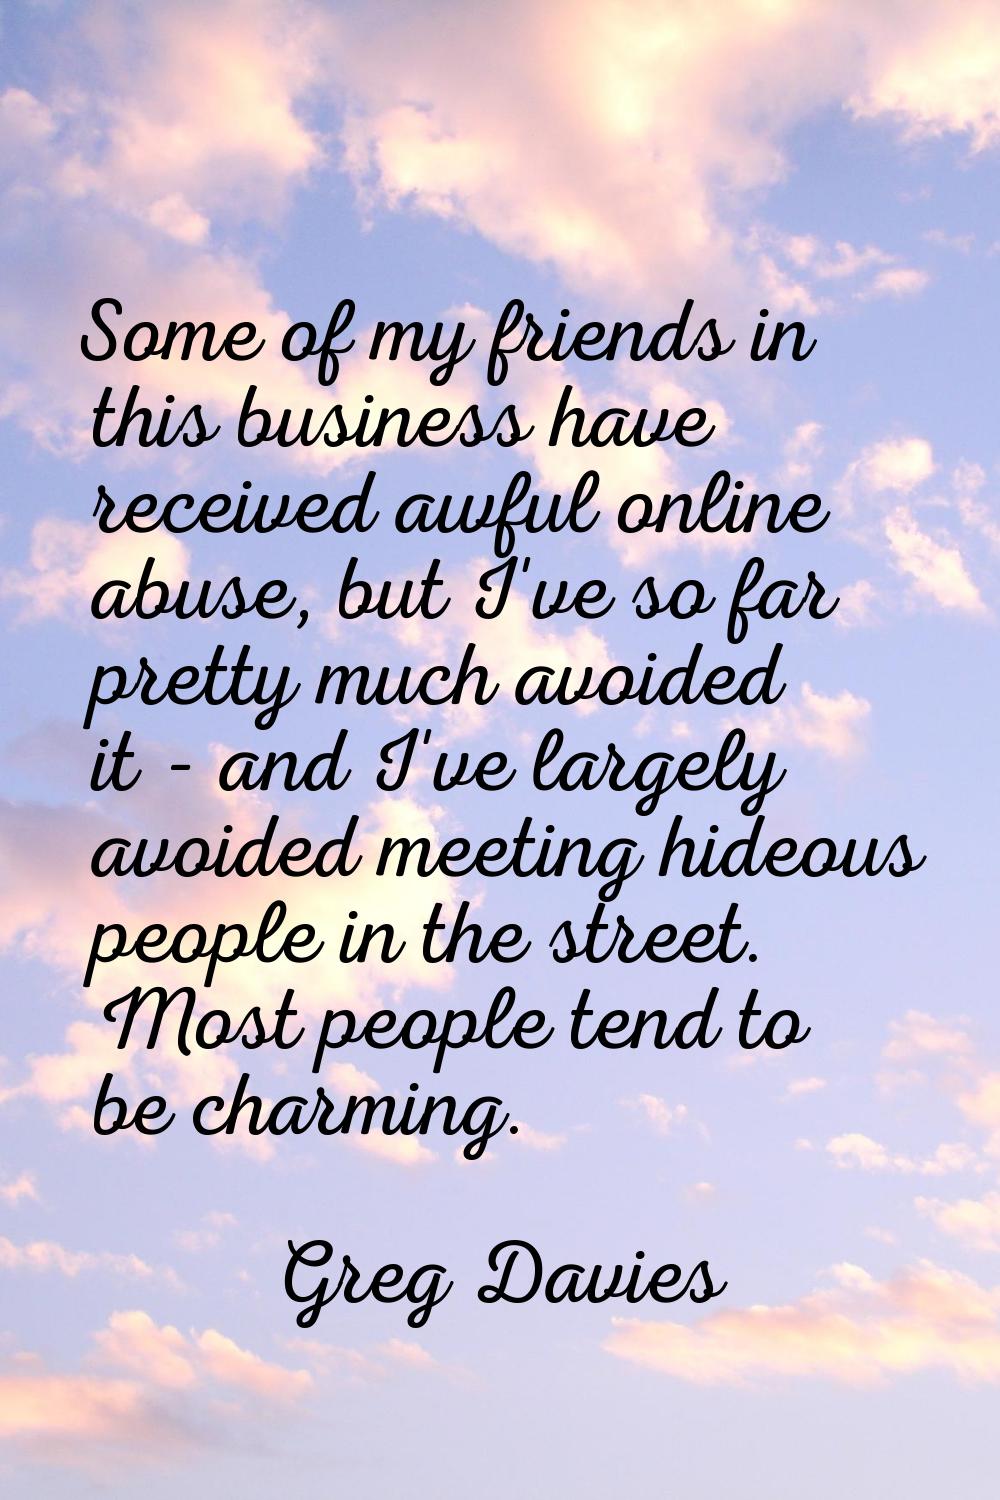 Some of my friends in this business have received awful online abuse, but I've so far pretty much a